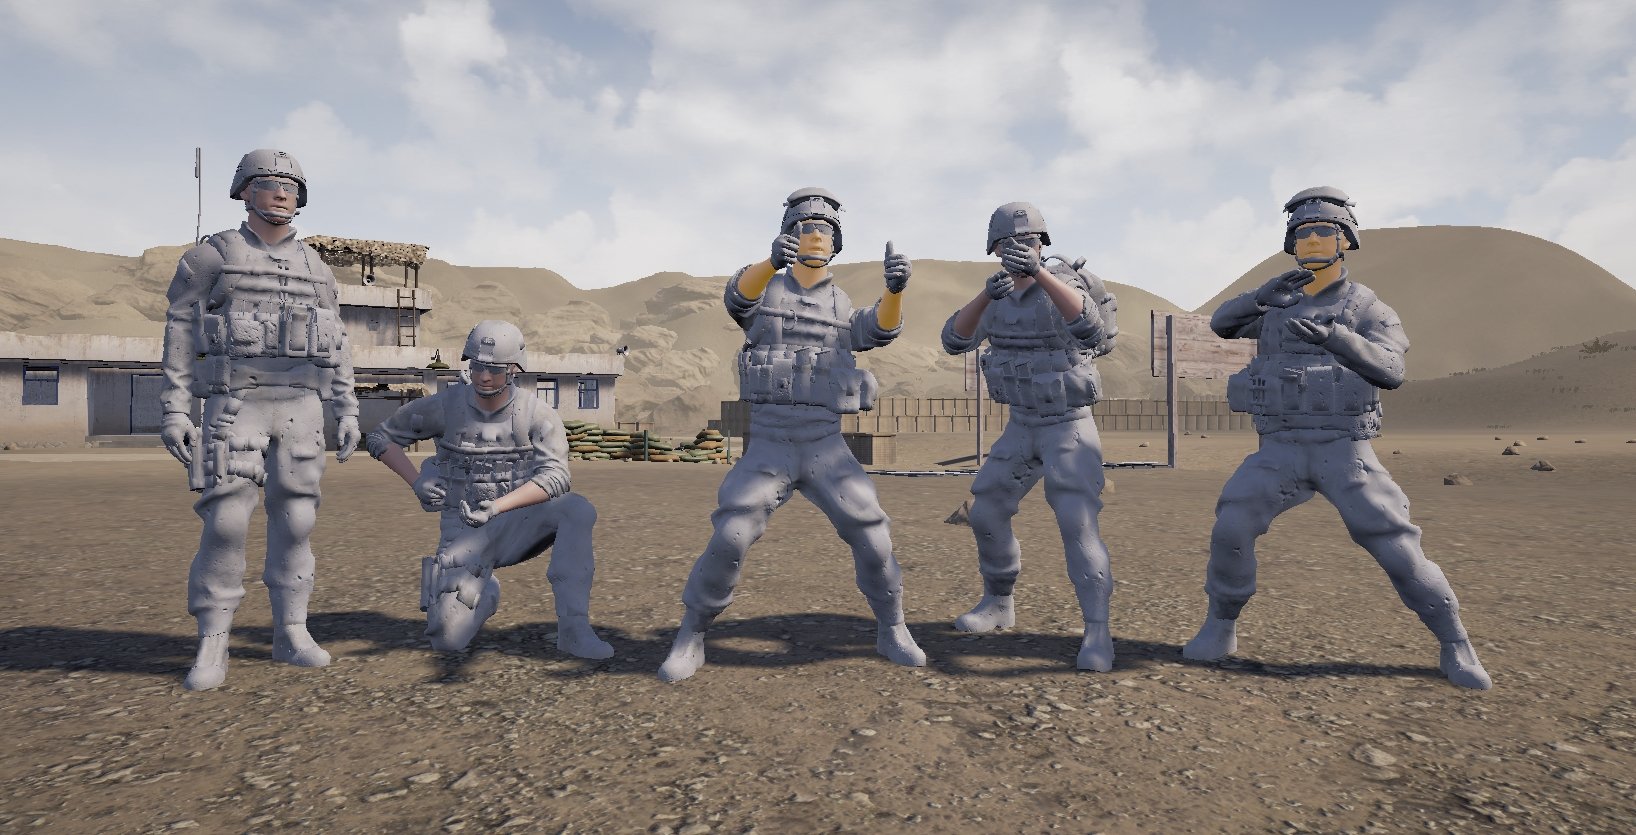 Five squad character have fun